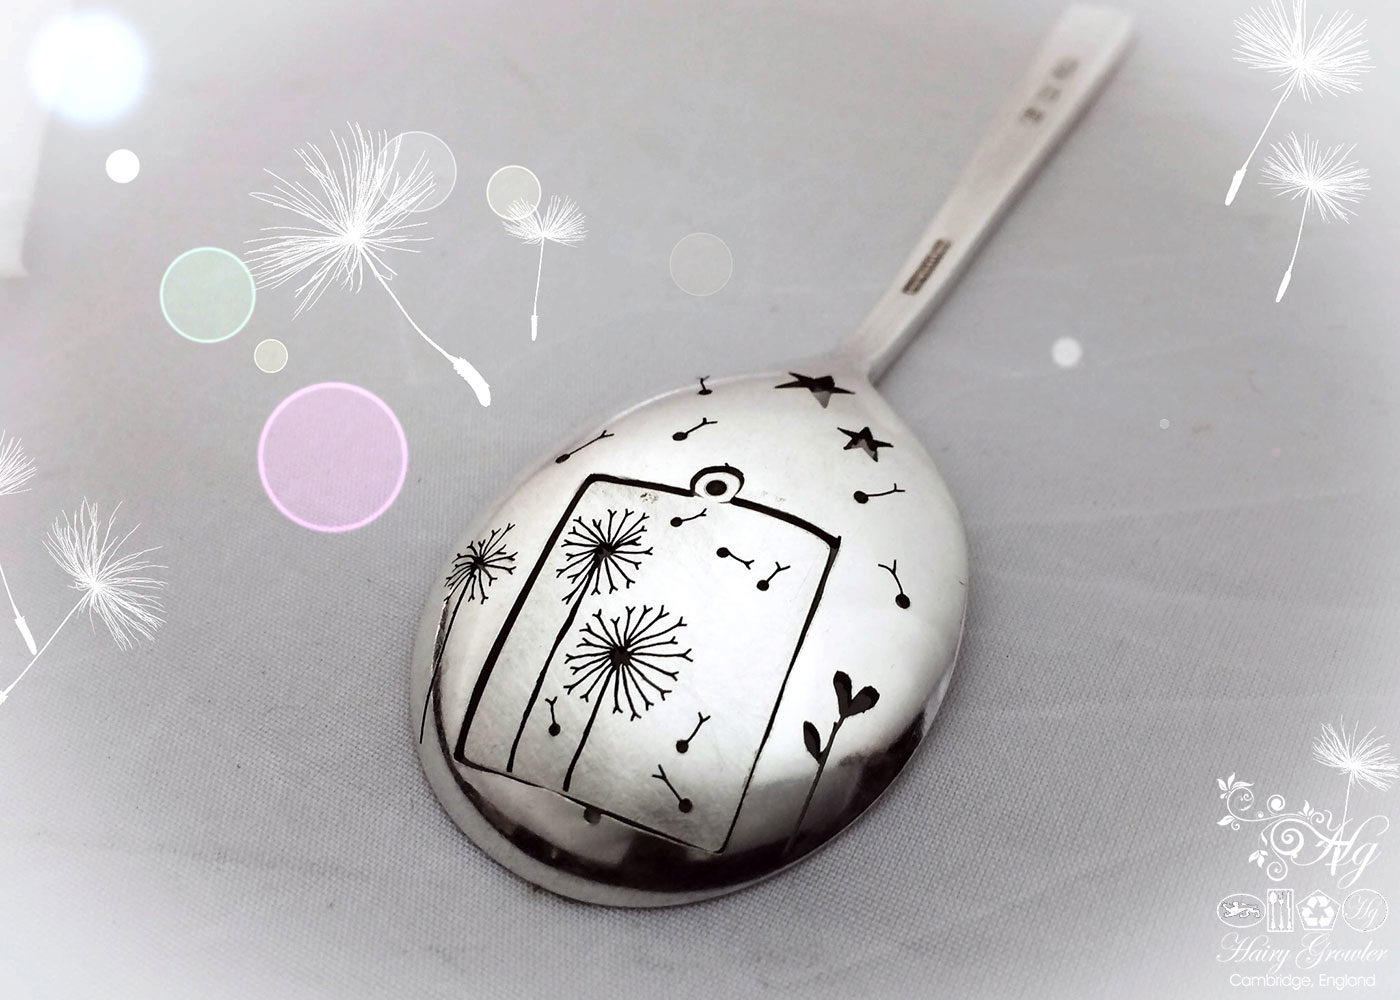 Handmade and upcycled dandelion clock necklace reverse of spoon